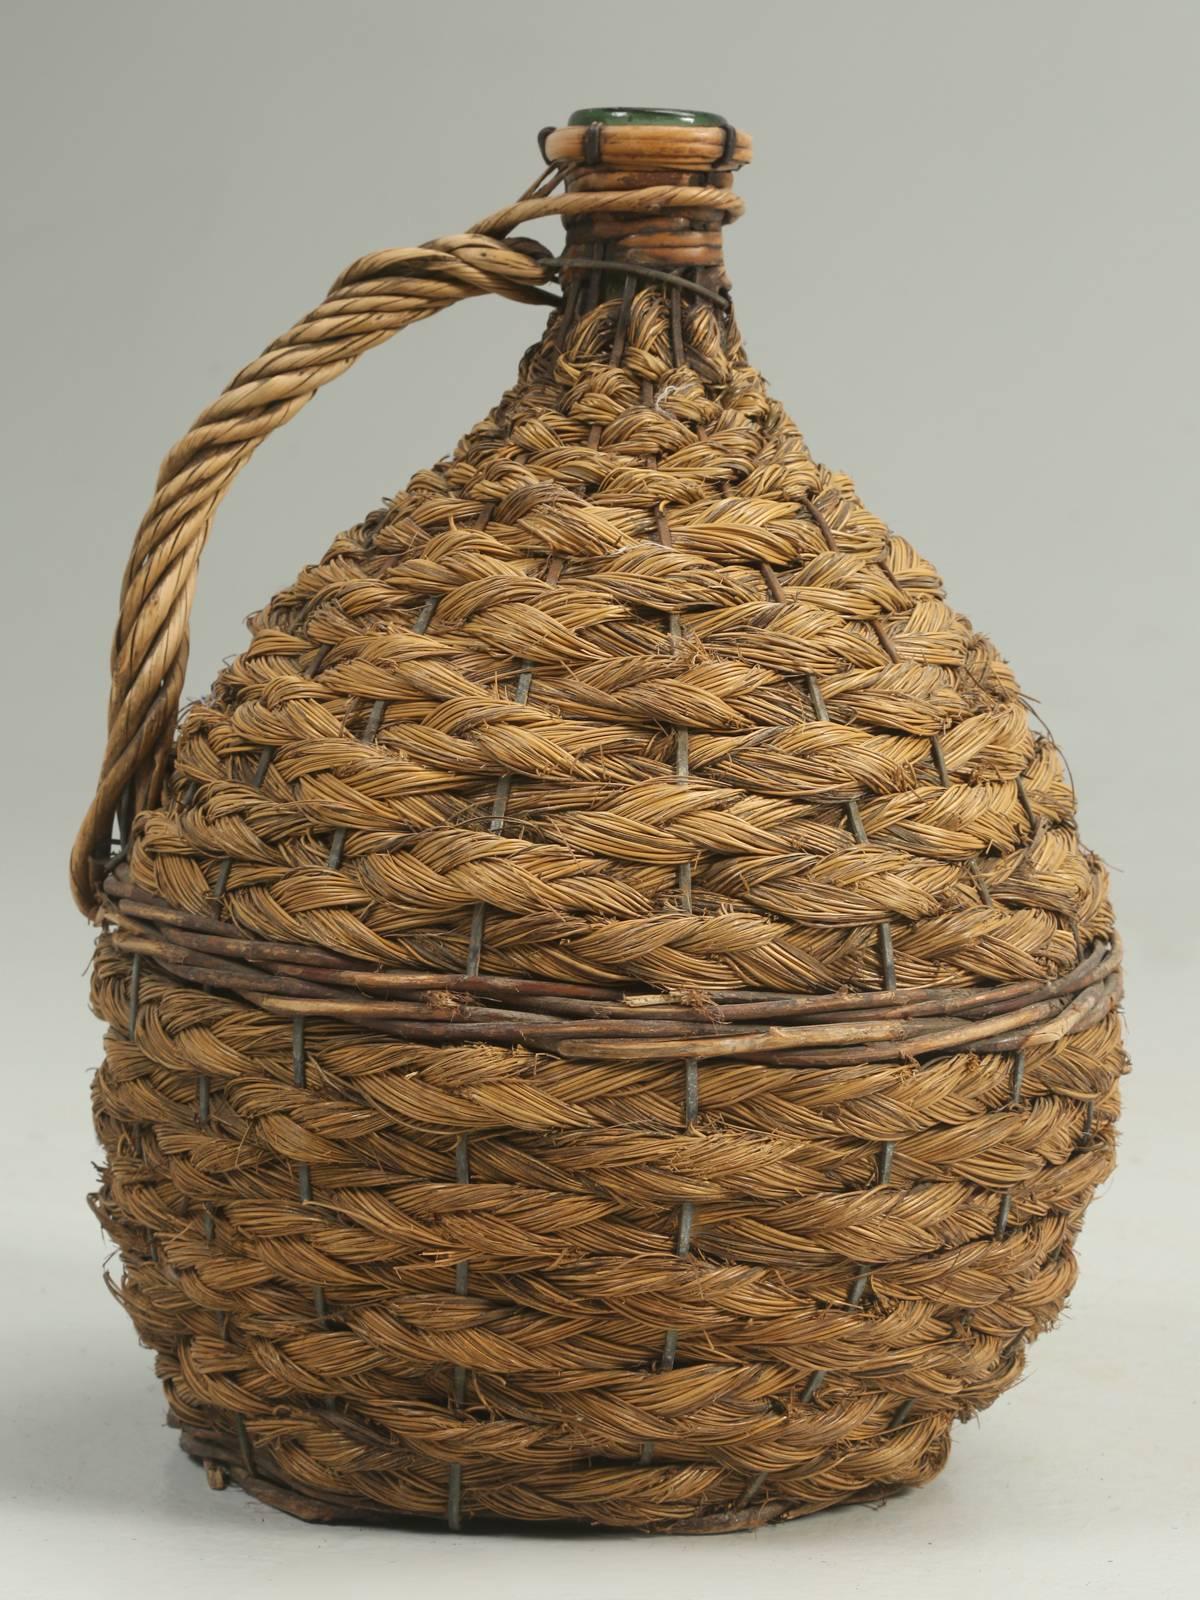 Antique Demijohn bottle, Demijohn, referring to any glass vessel with a large body and small neck and generally encased in wickerwork, thin slats of wood. The word originates from the French dame-jeanne, literally 